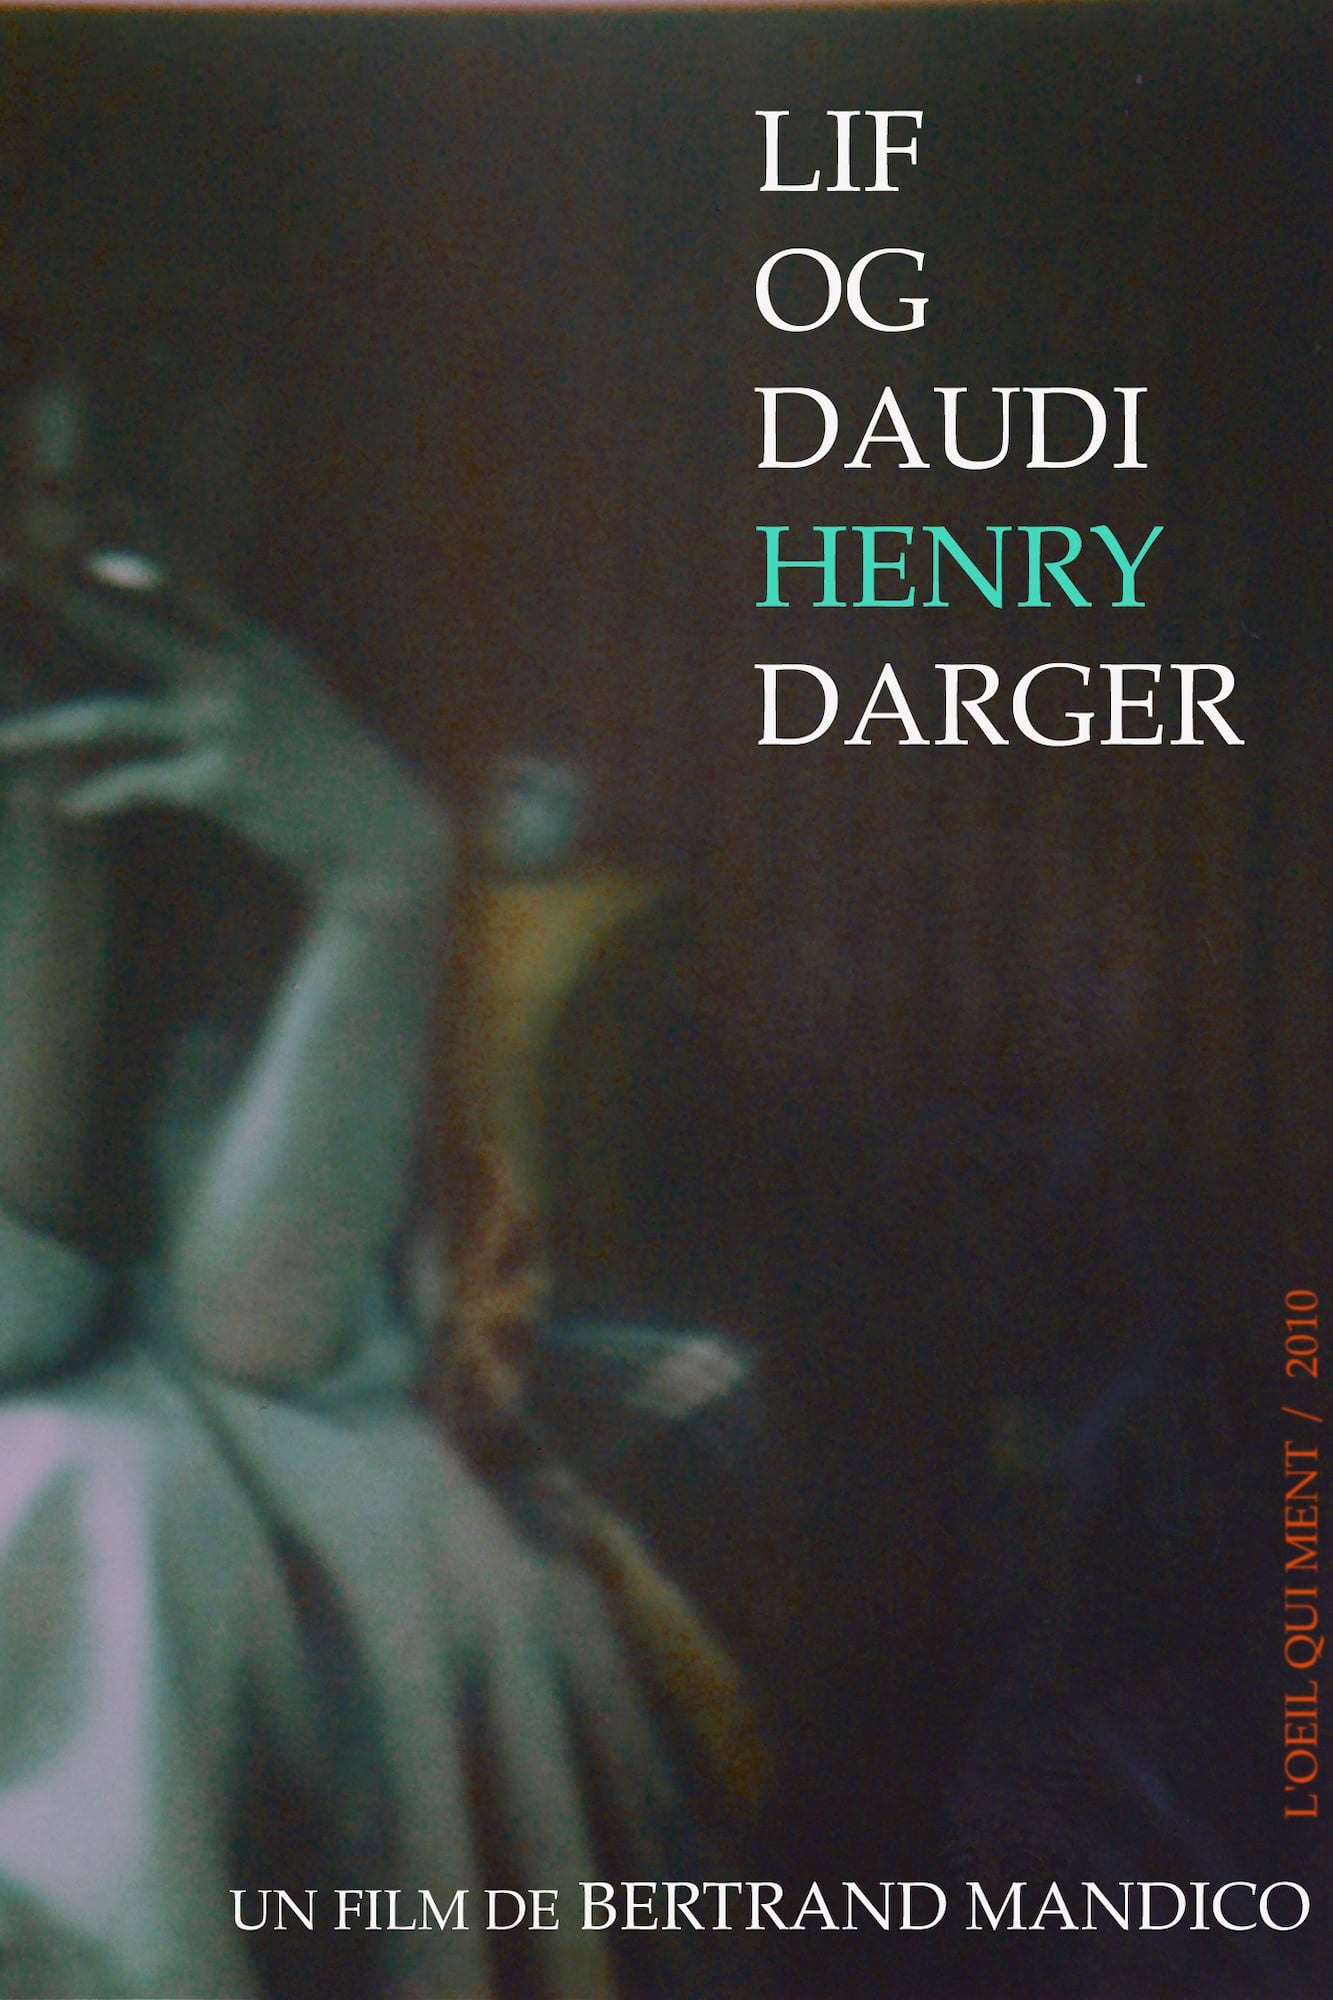 The Life and Death of Henry Darger